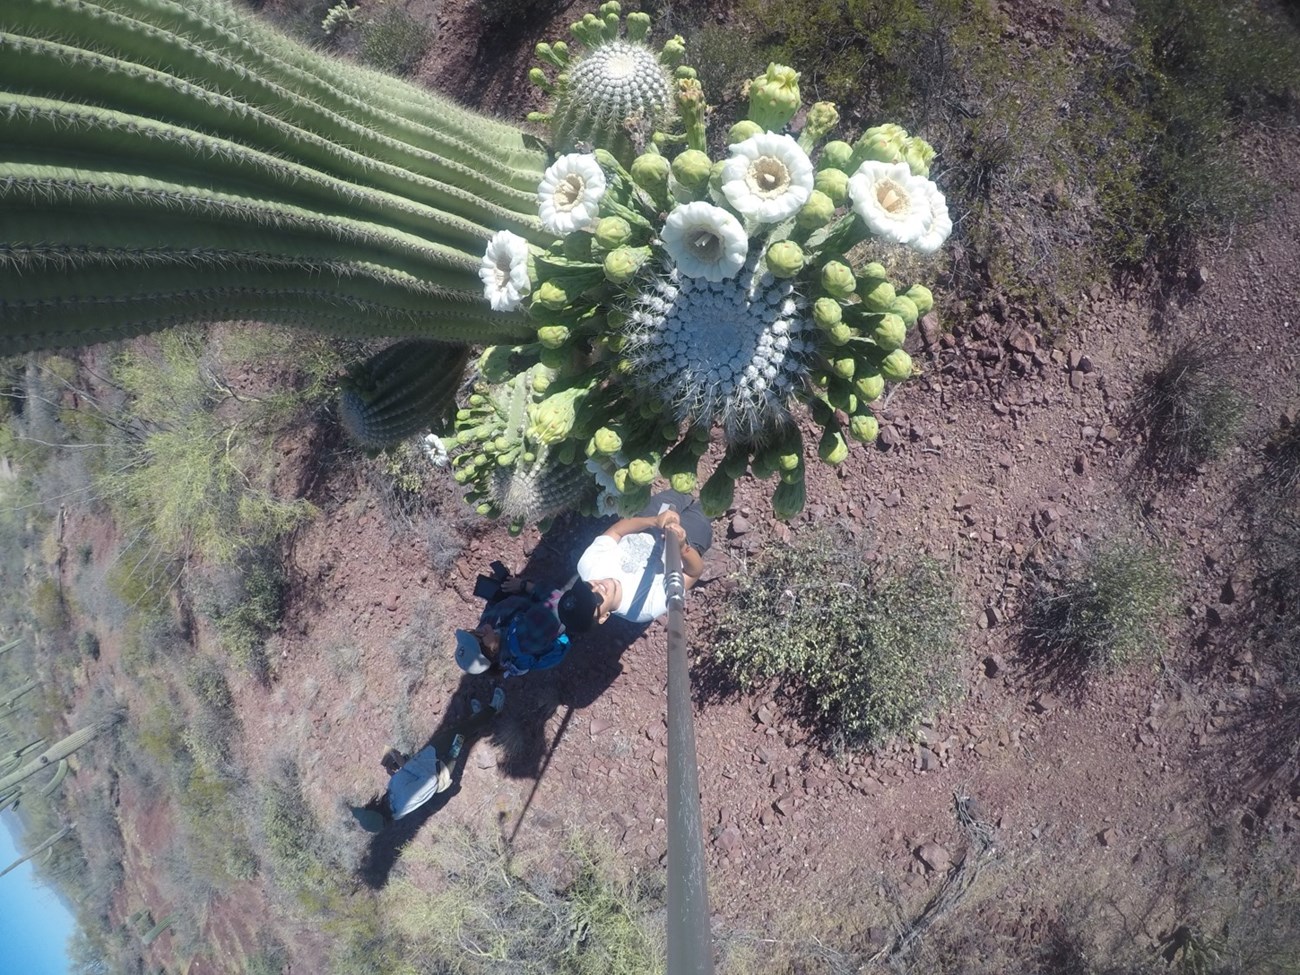 crown of saguaro flowers viewed from the pole-camera perspective above, showing bio-tech down below